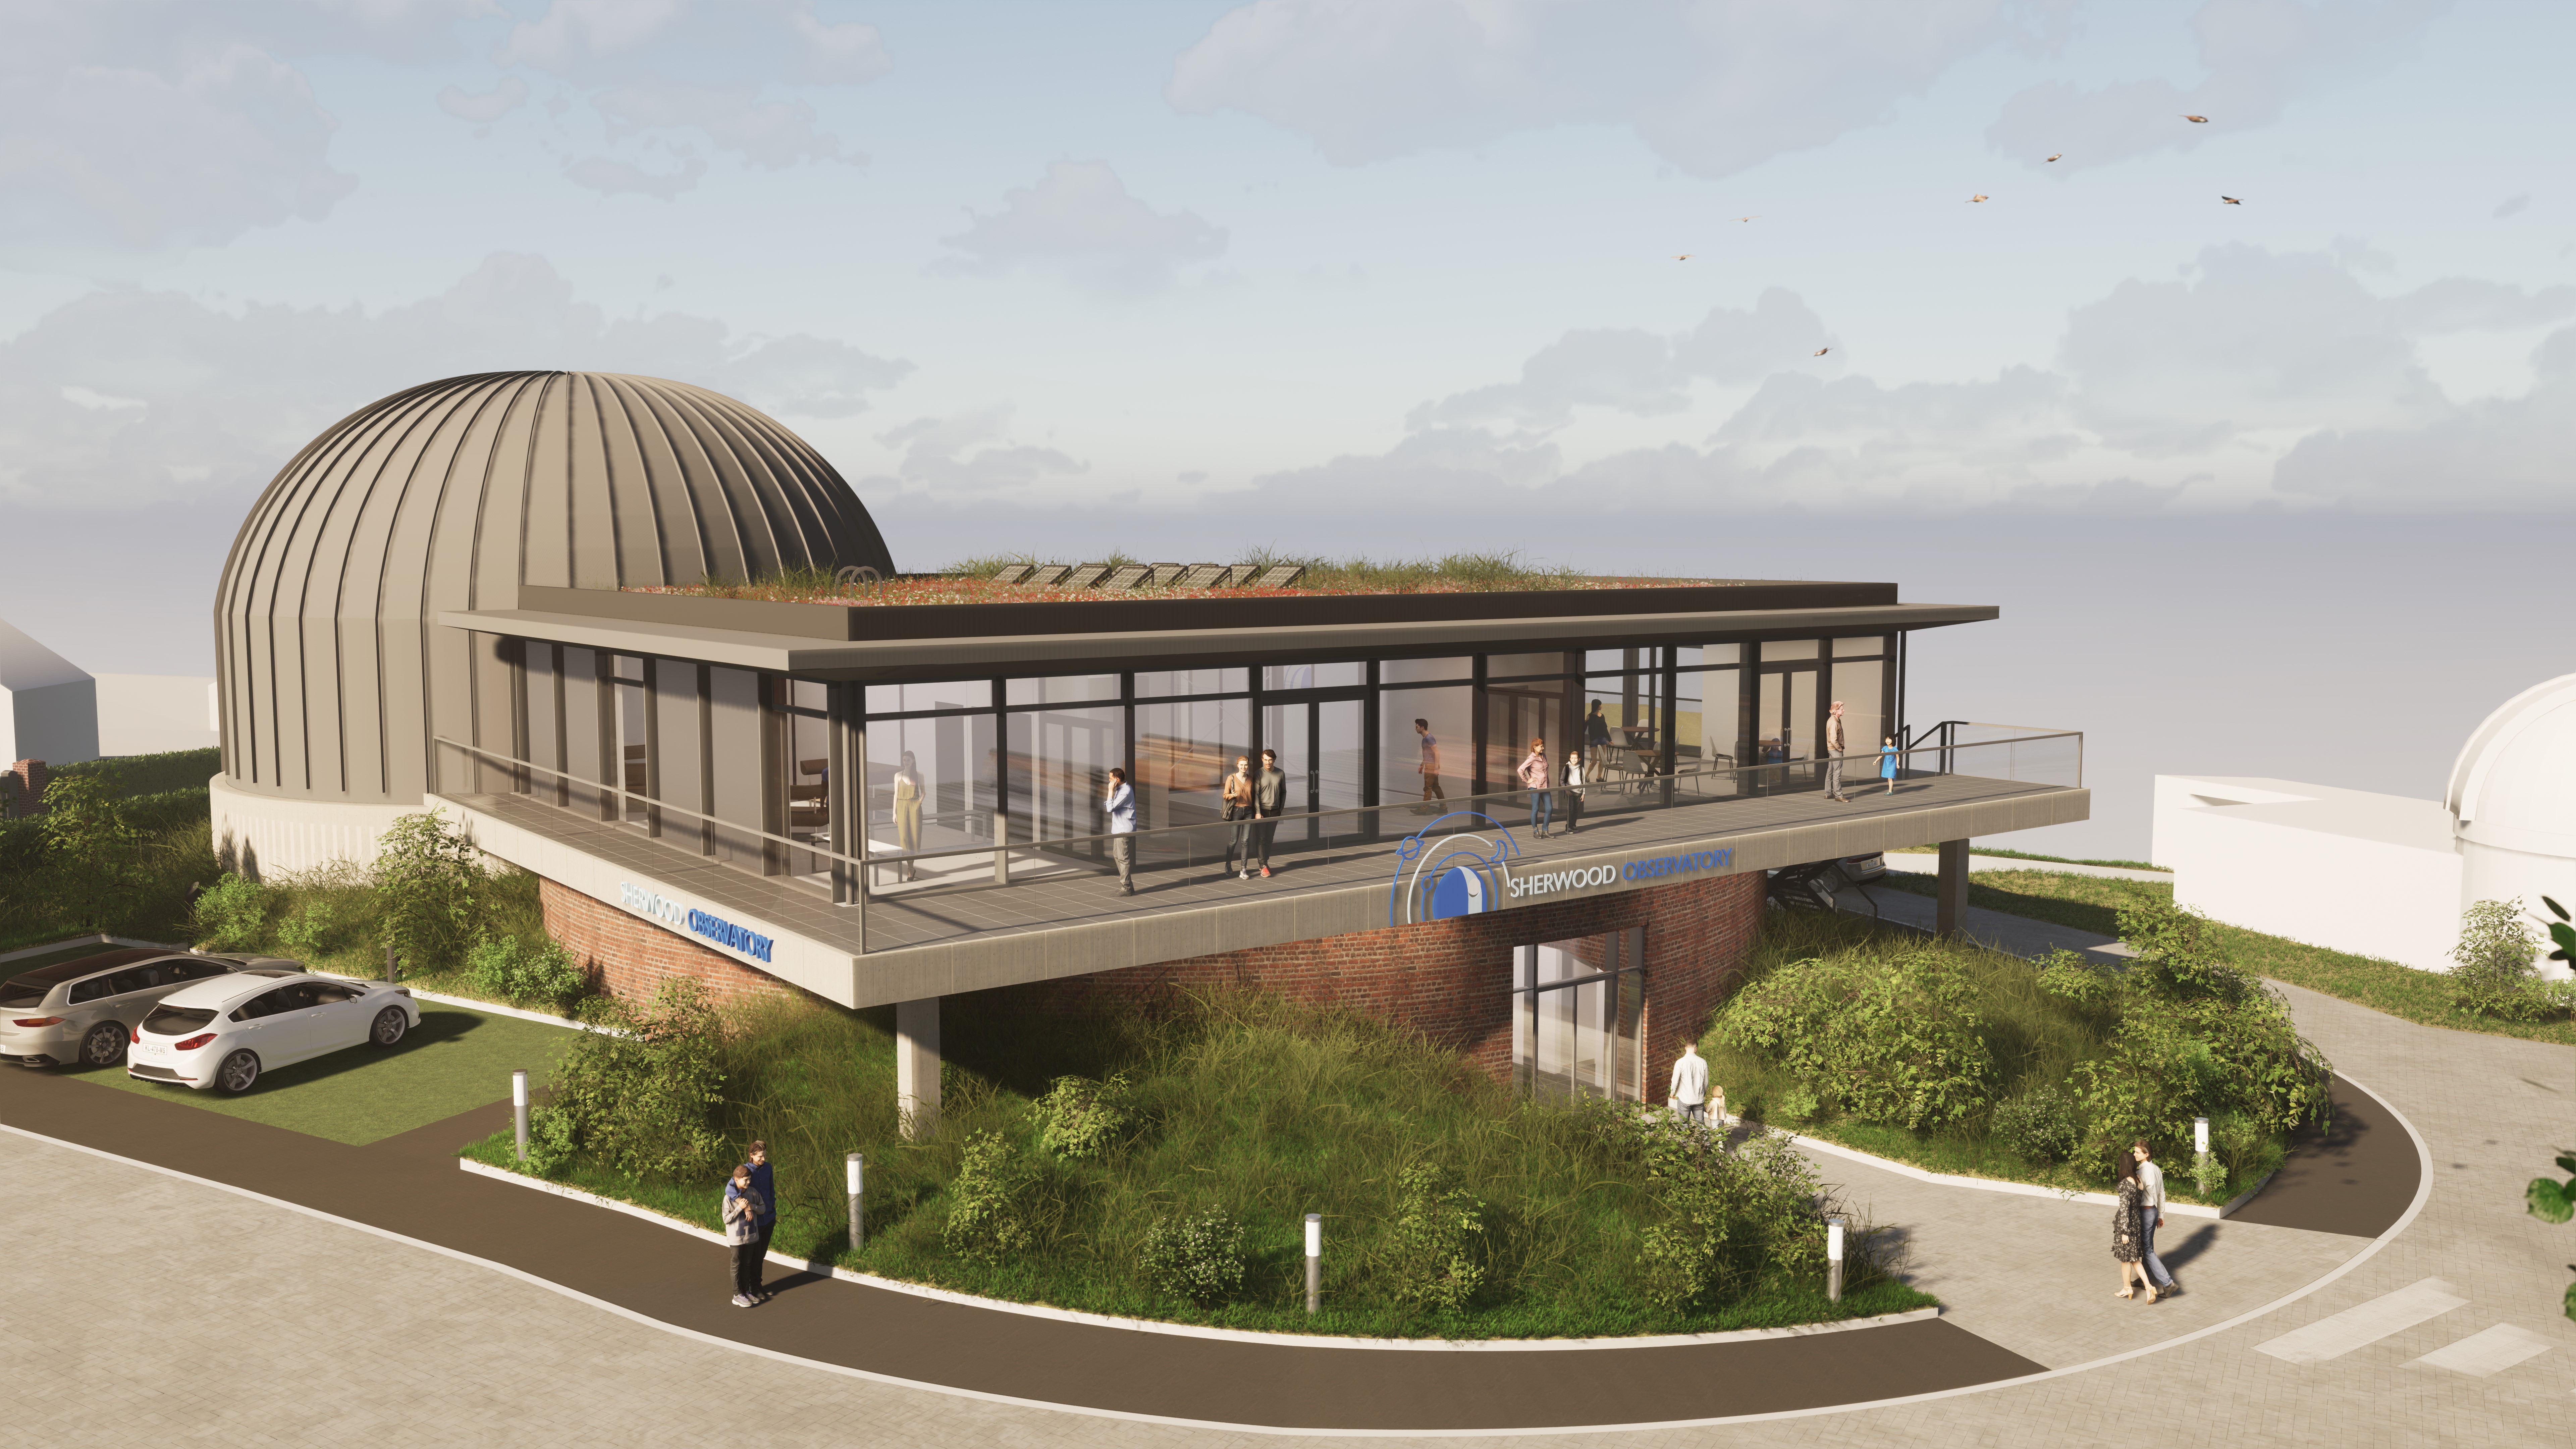 An artisit impression of the new planetarium and science discovery centre at sherwood observatory